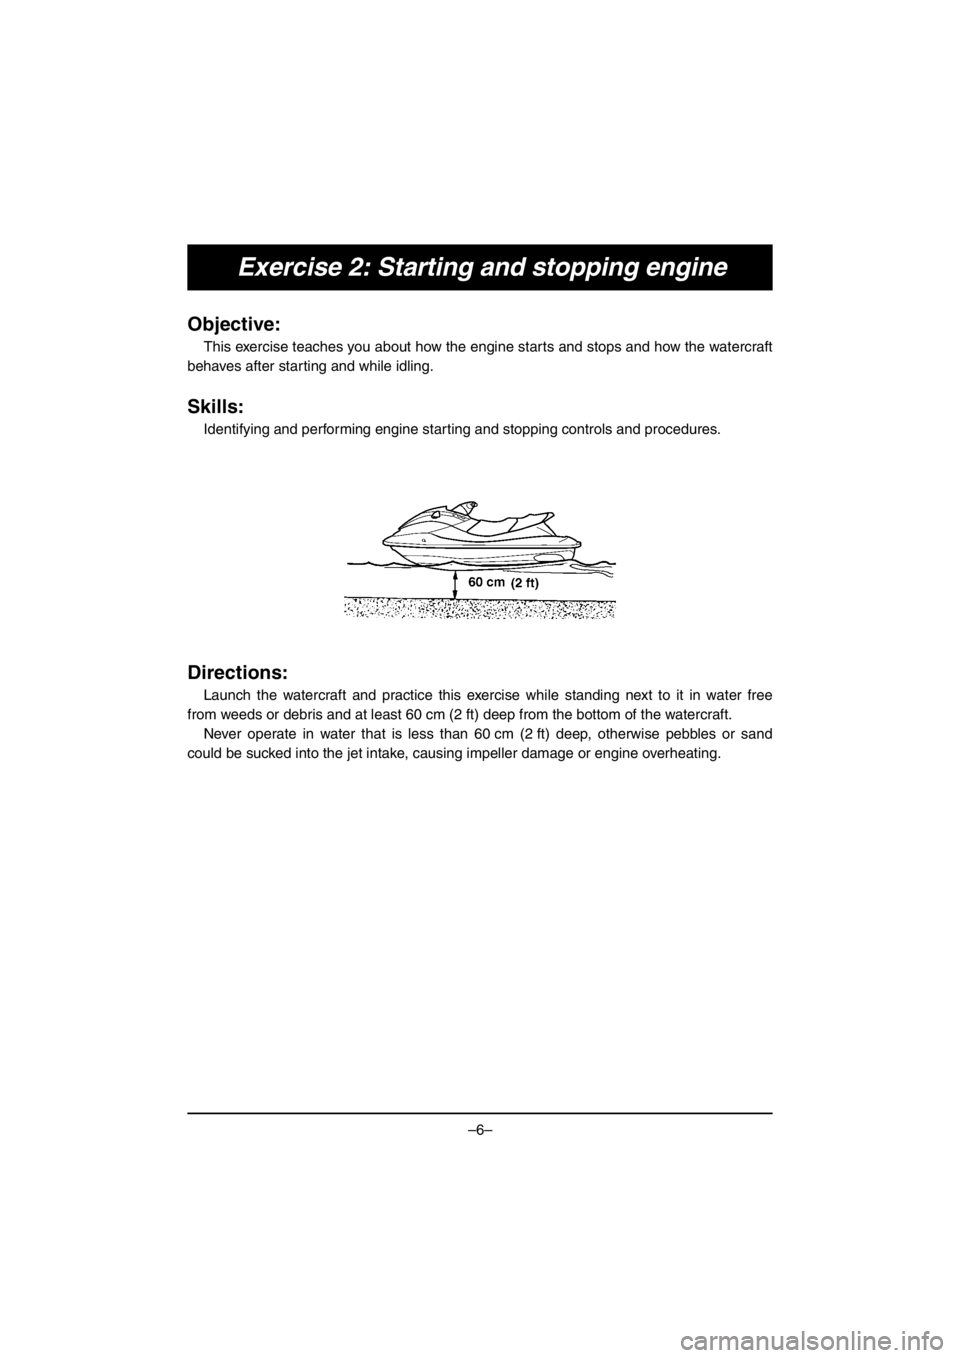 YAMAHA VX CRUISER HO 2016  Notices Demploi (in French) –6–
Exercise 2: Starting and stopping engine
Objective:
This exercise teaches you about how the engine starts and stops and how the watercraft
behaves after starting and while idling.
Skills:
Iden